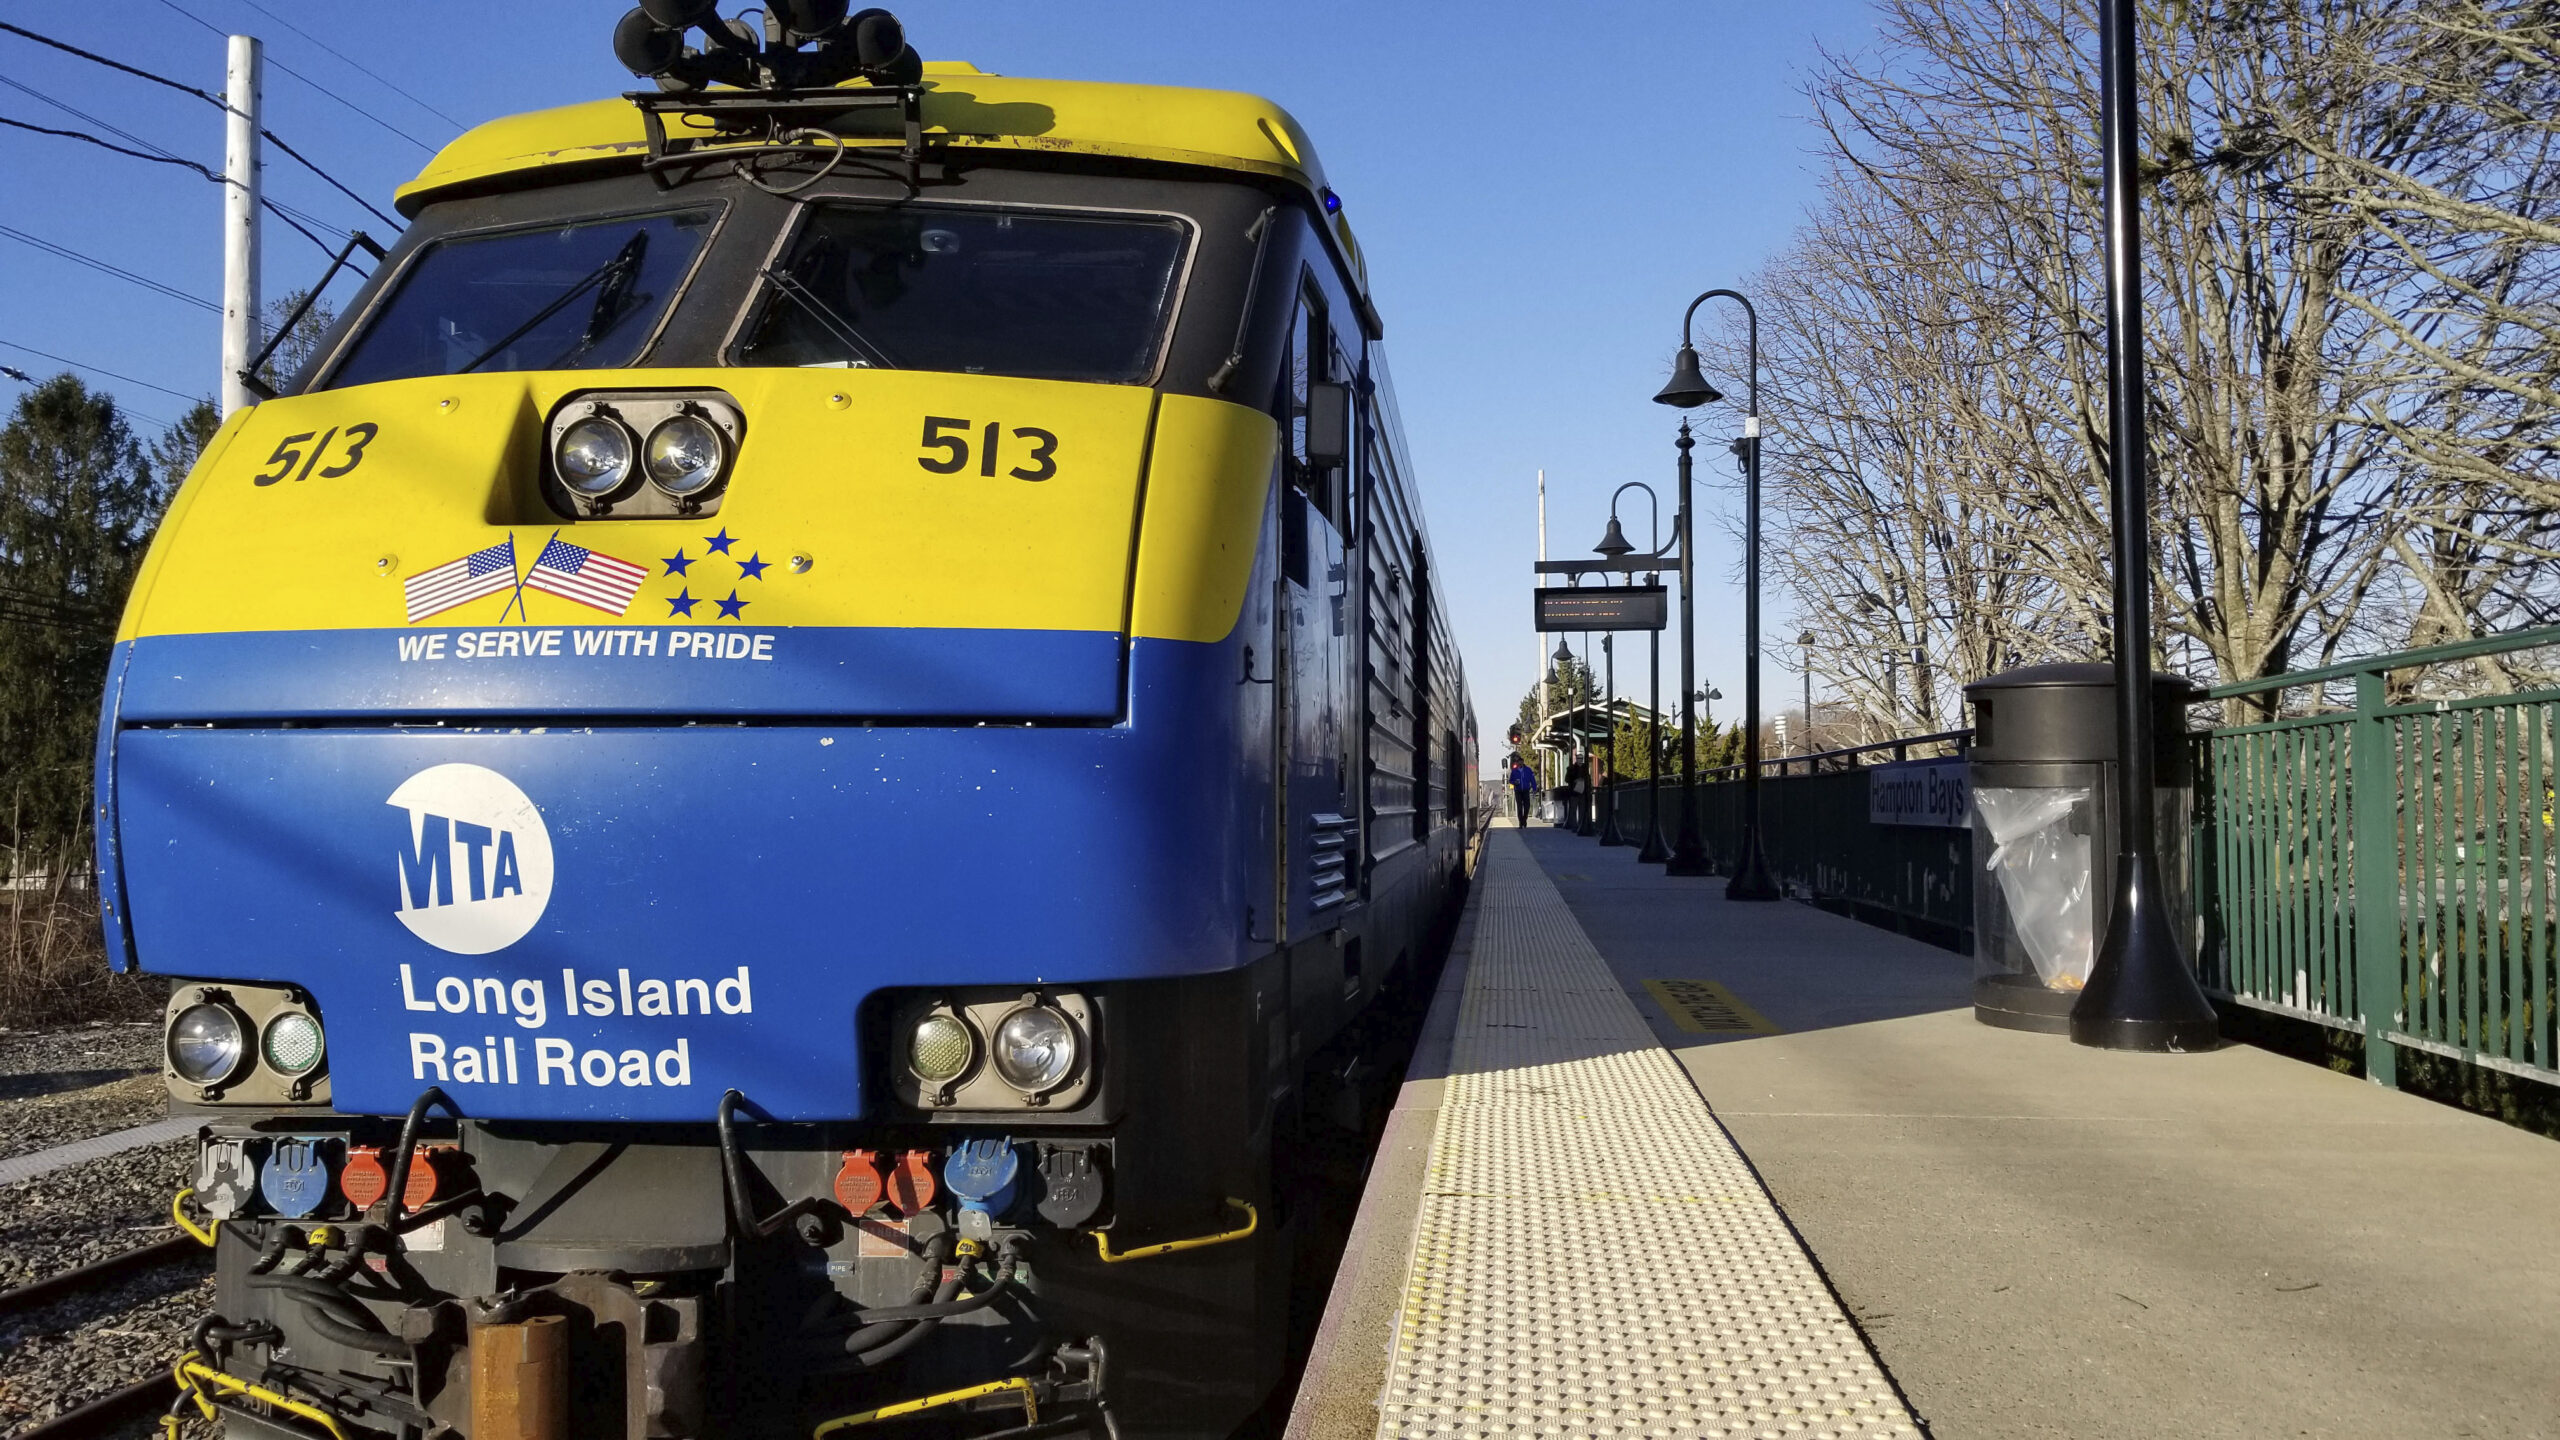 The LIRR has rejected the request of South Fork officials to provide at least one eastbound commuter train between Speonk and Montauk on Friday mornings in the summer.